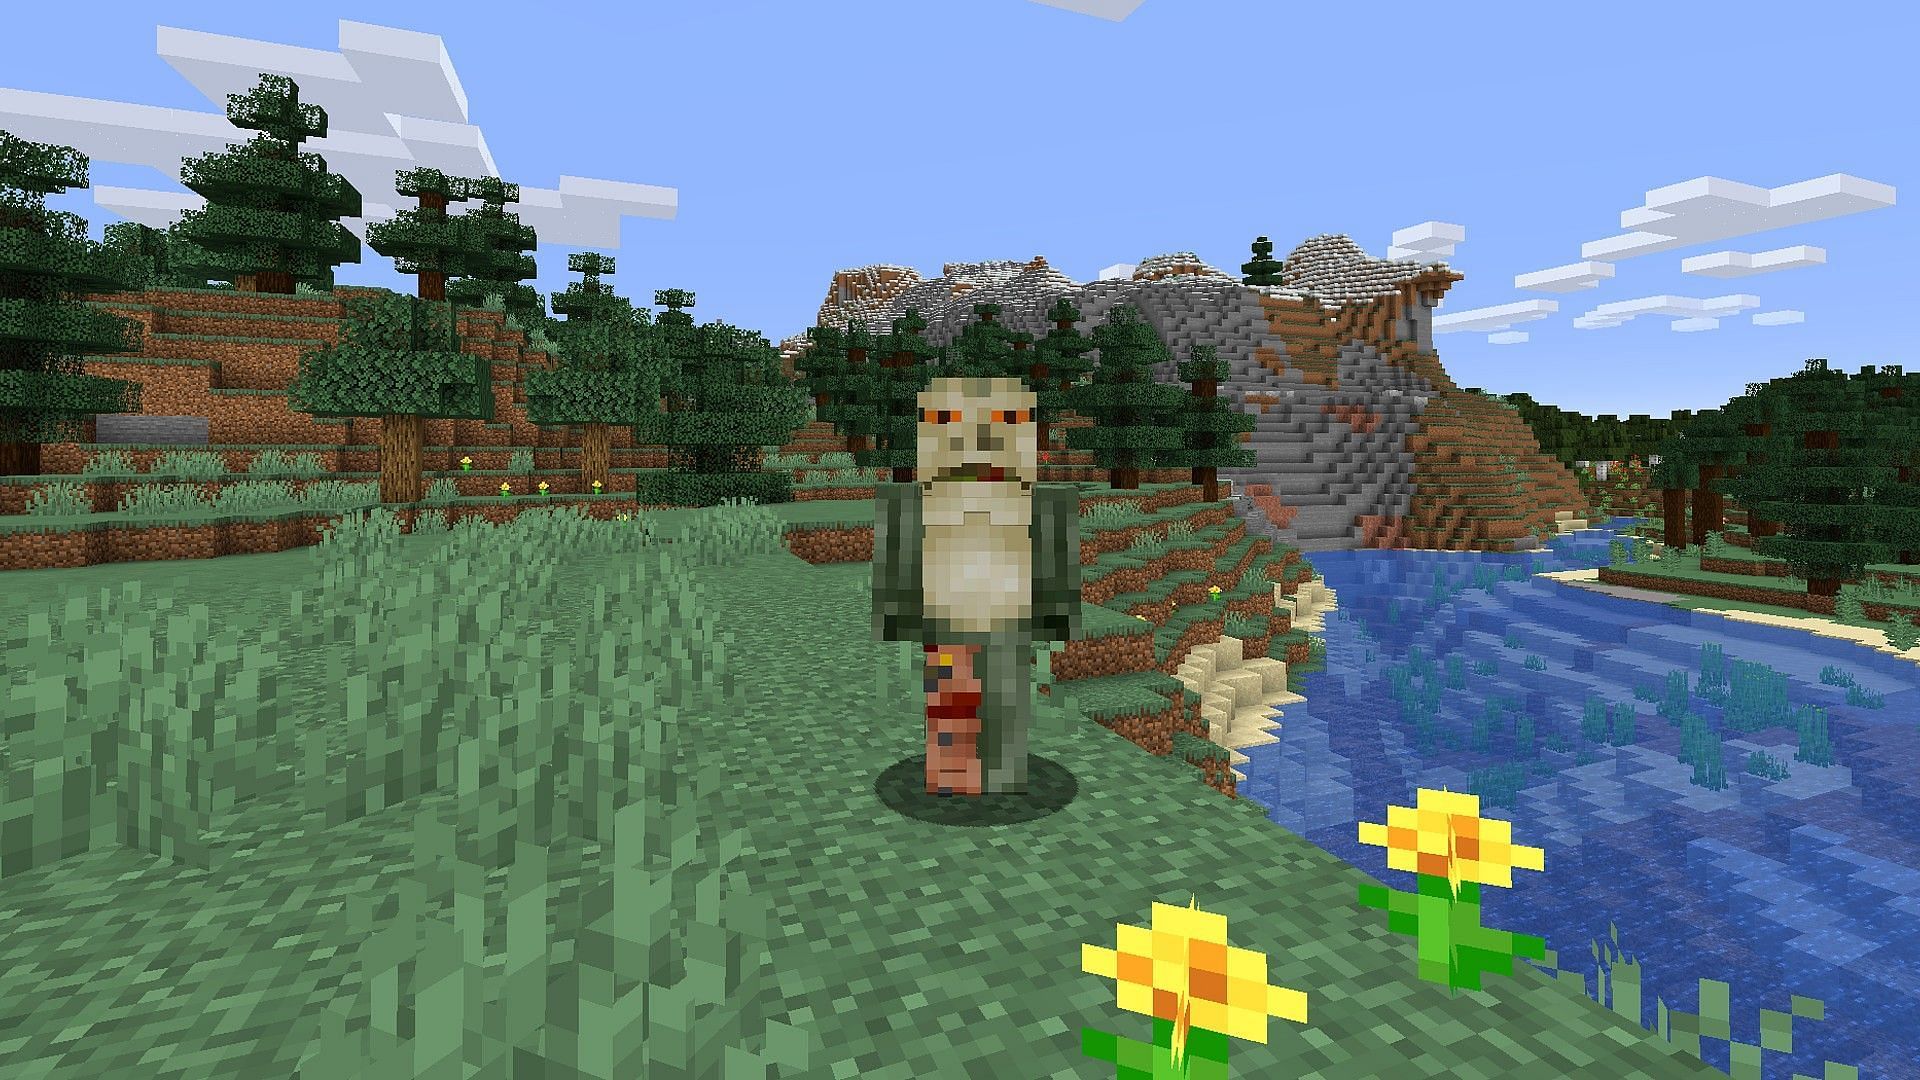 Skins are an excellent way for players to show off their style in Minecraft (Image via Mojang)